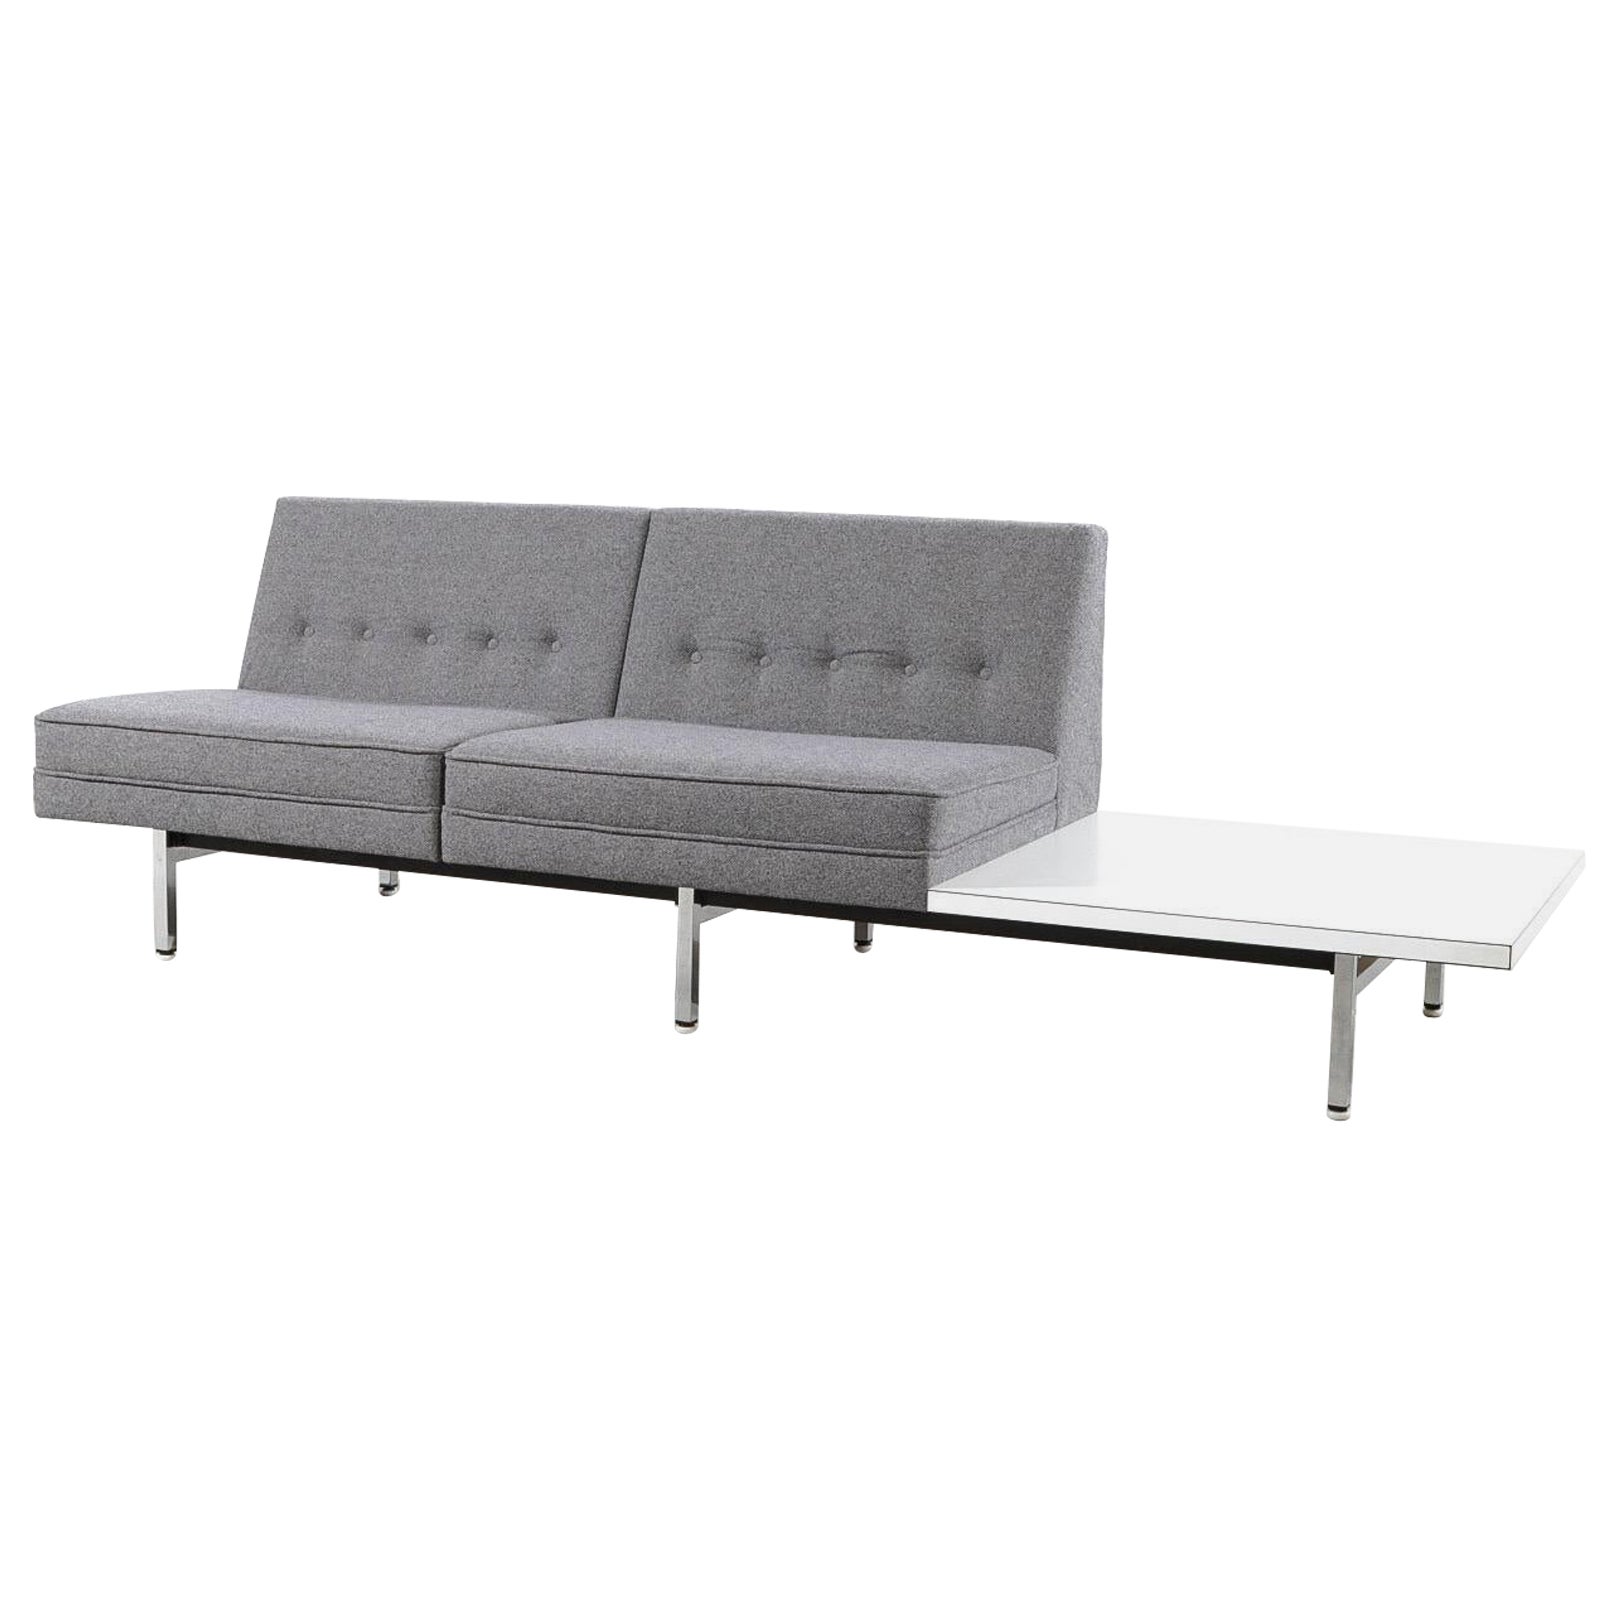 George Nelson Modular Sofa Table System Herman Miller For Sale